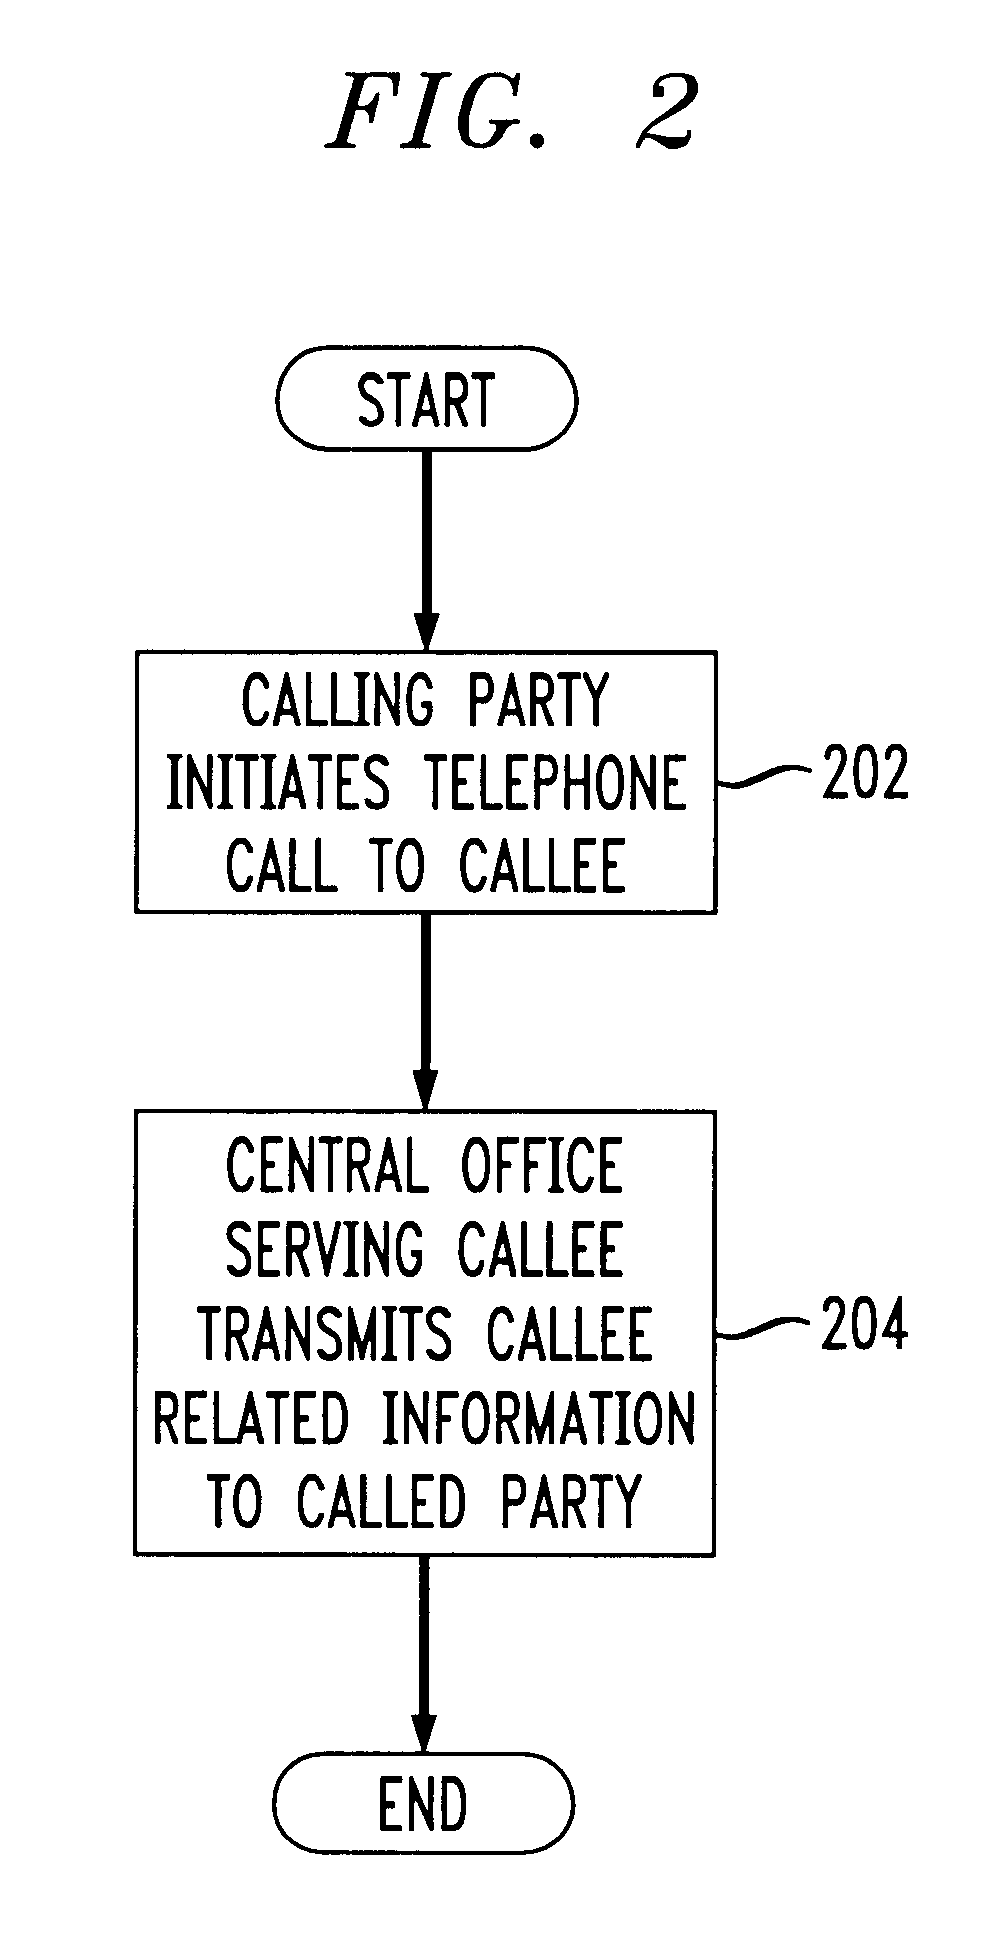 Display of call related information regarding a called party